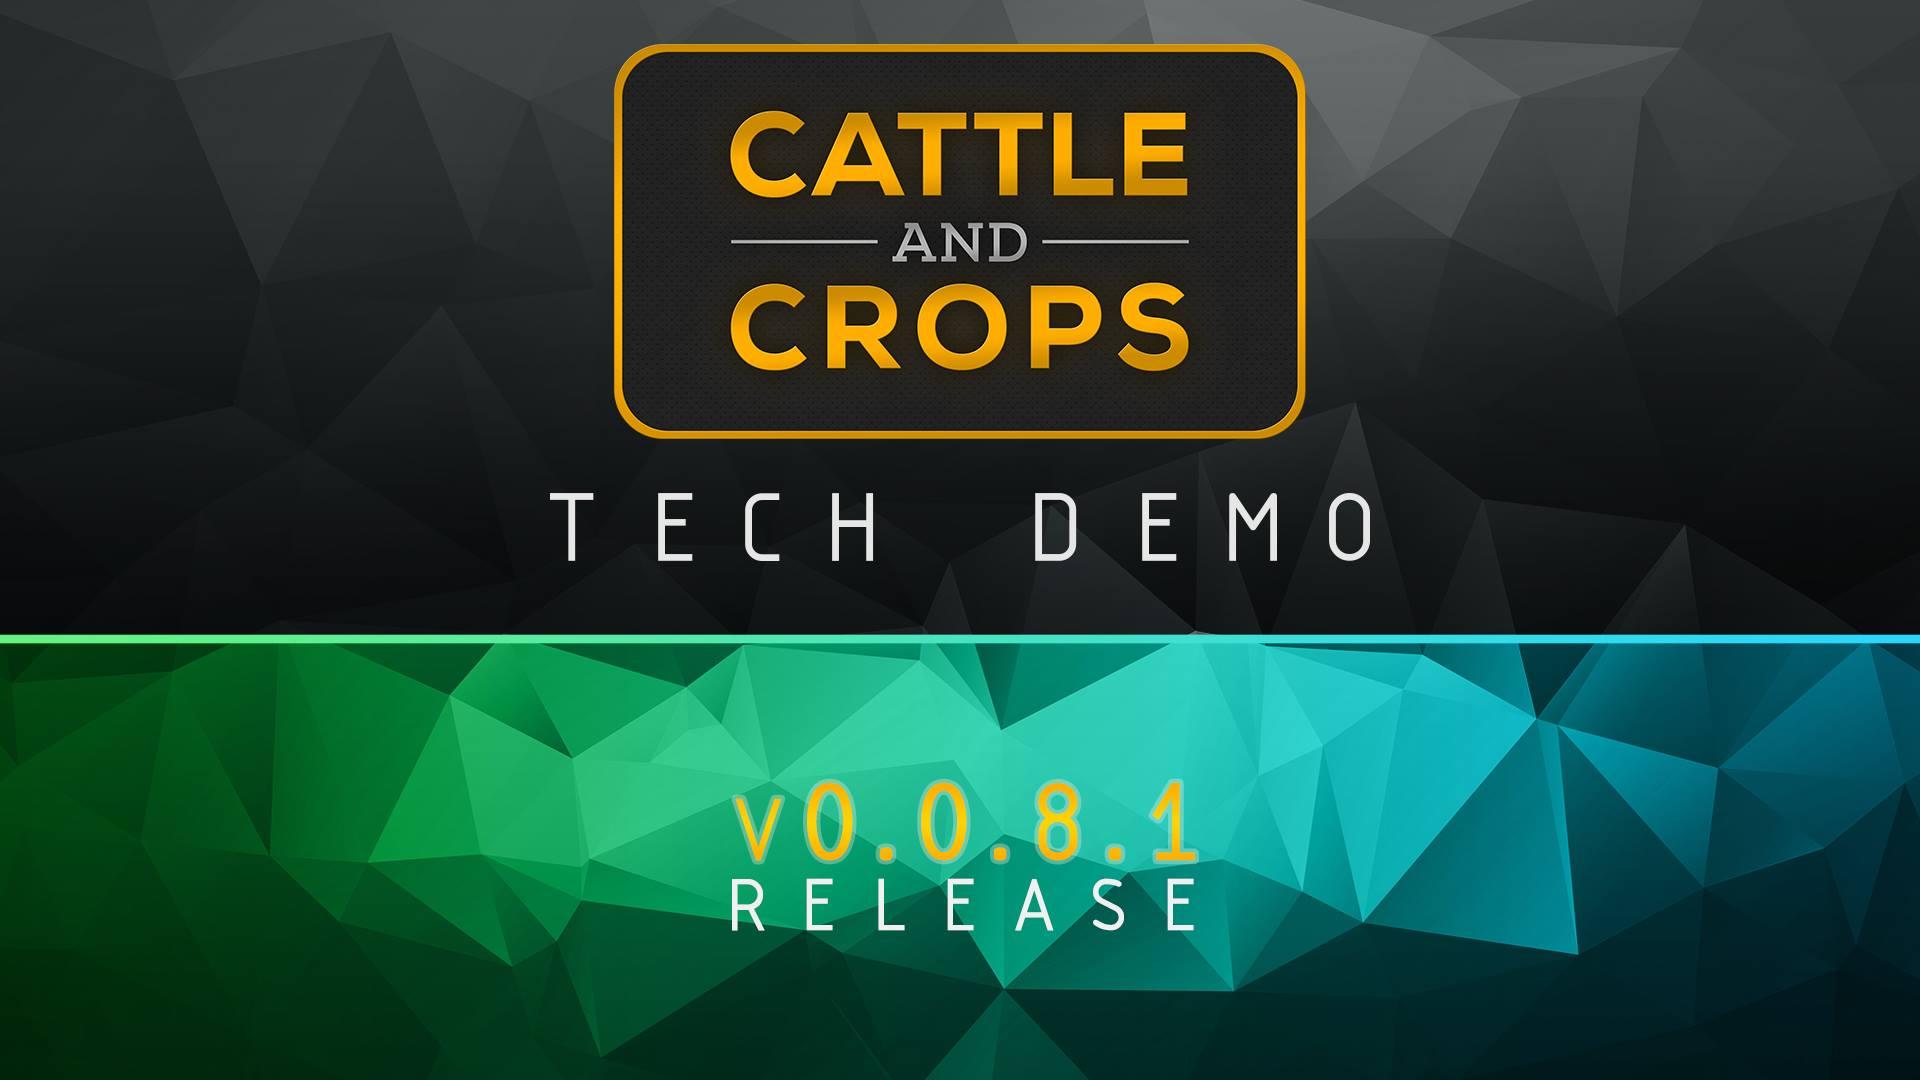 Cattle and Crops: About Tech Demo